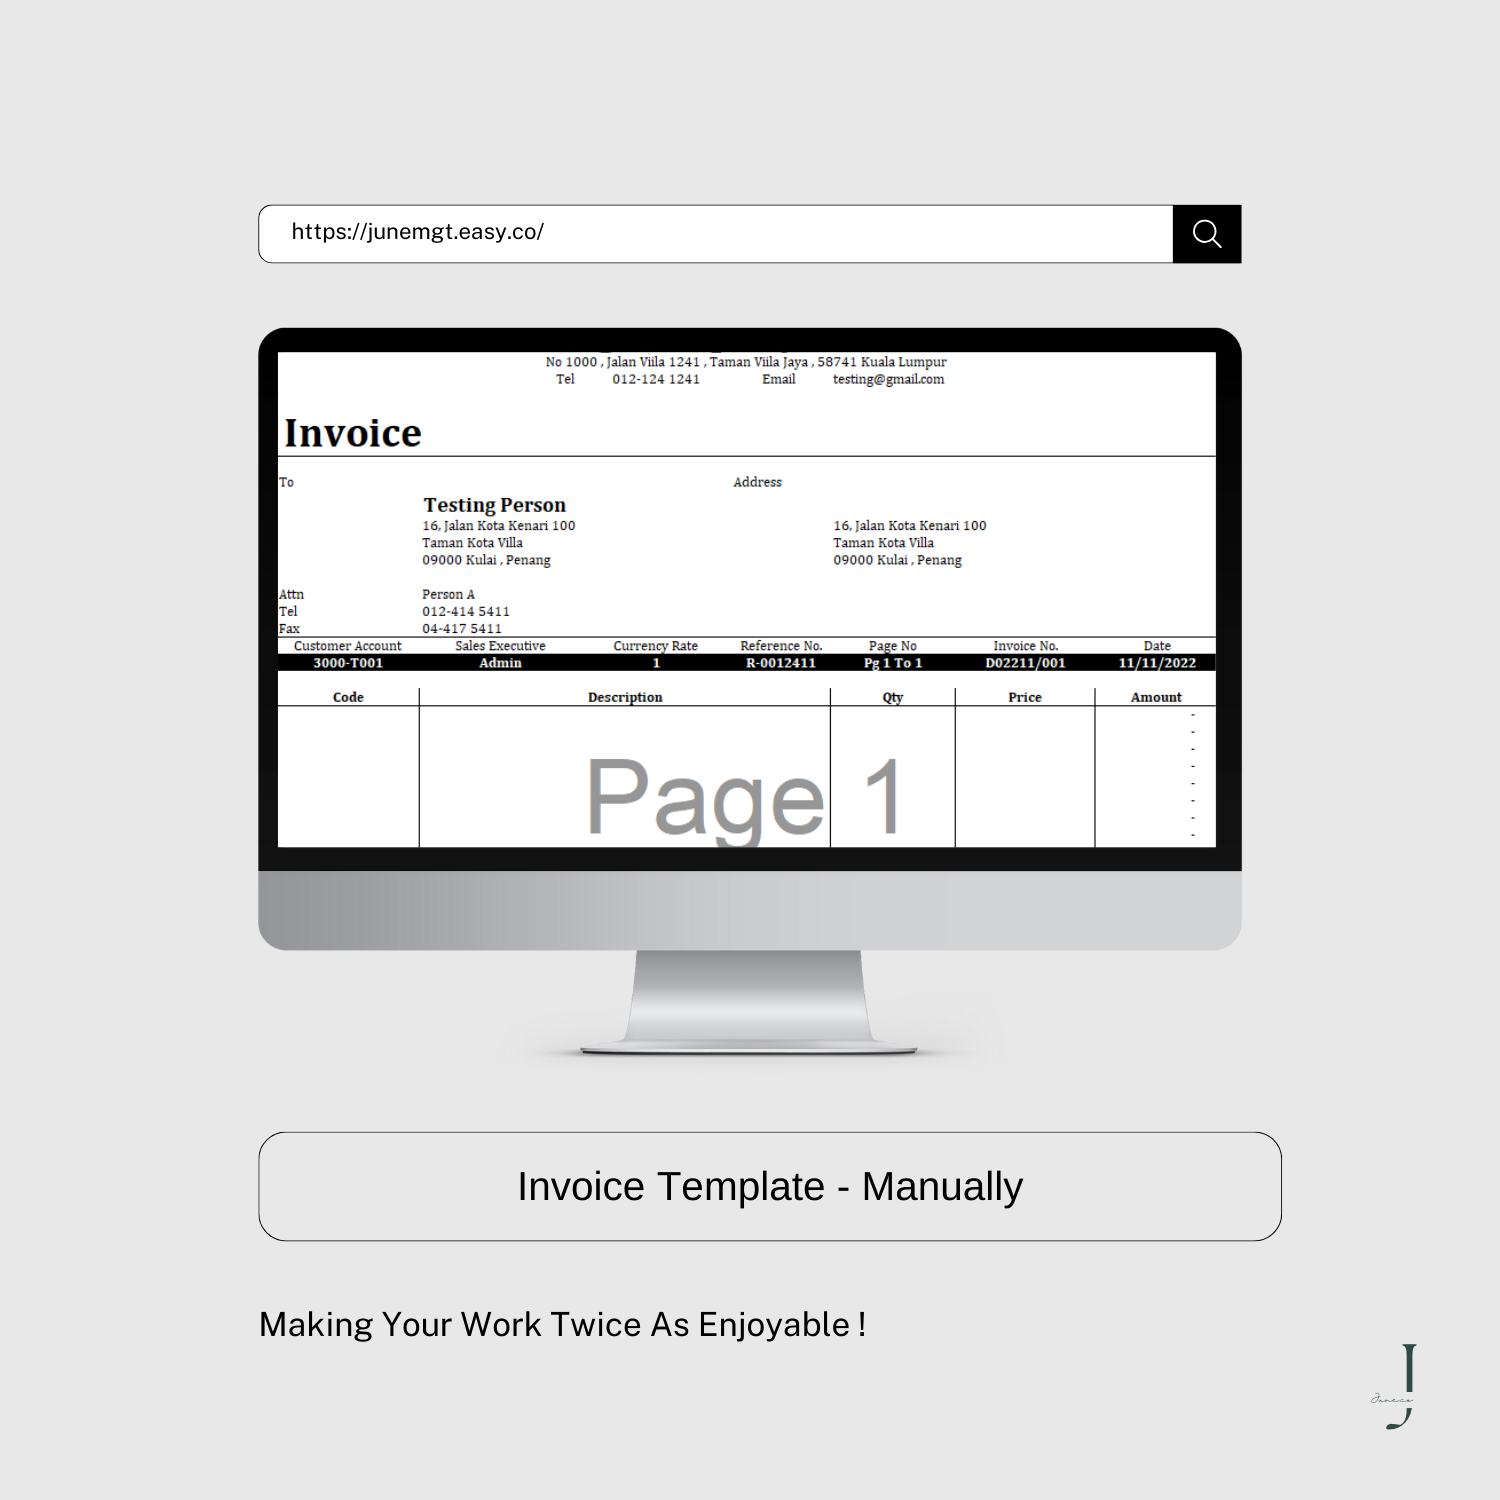 Invoice Template - Manually product1